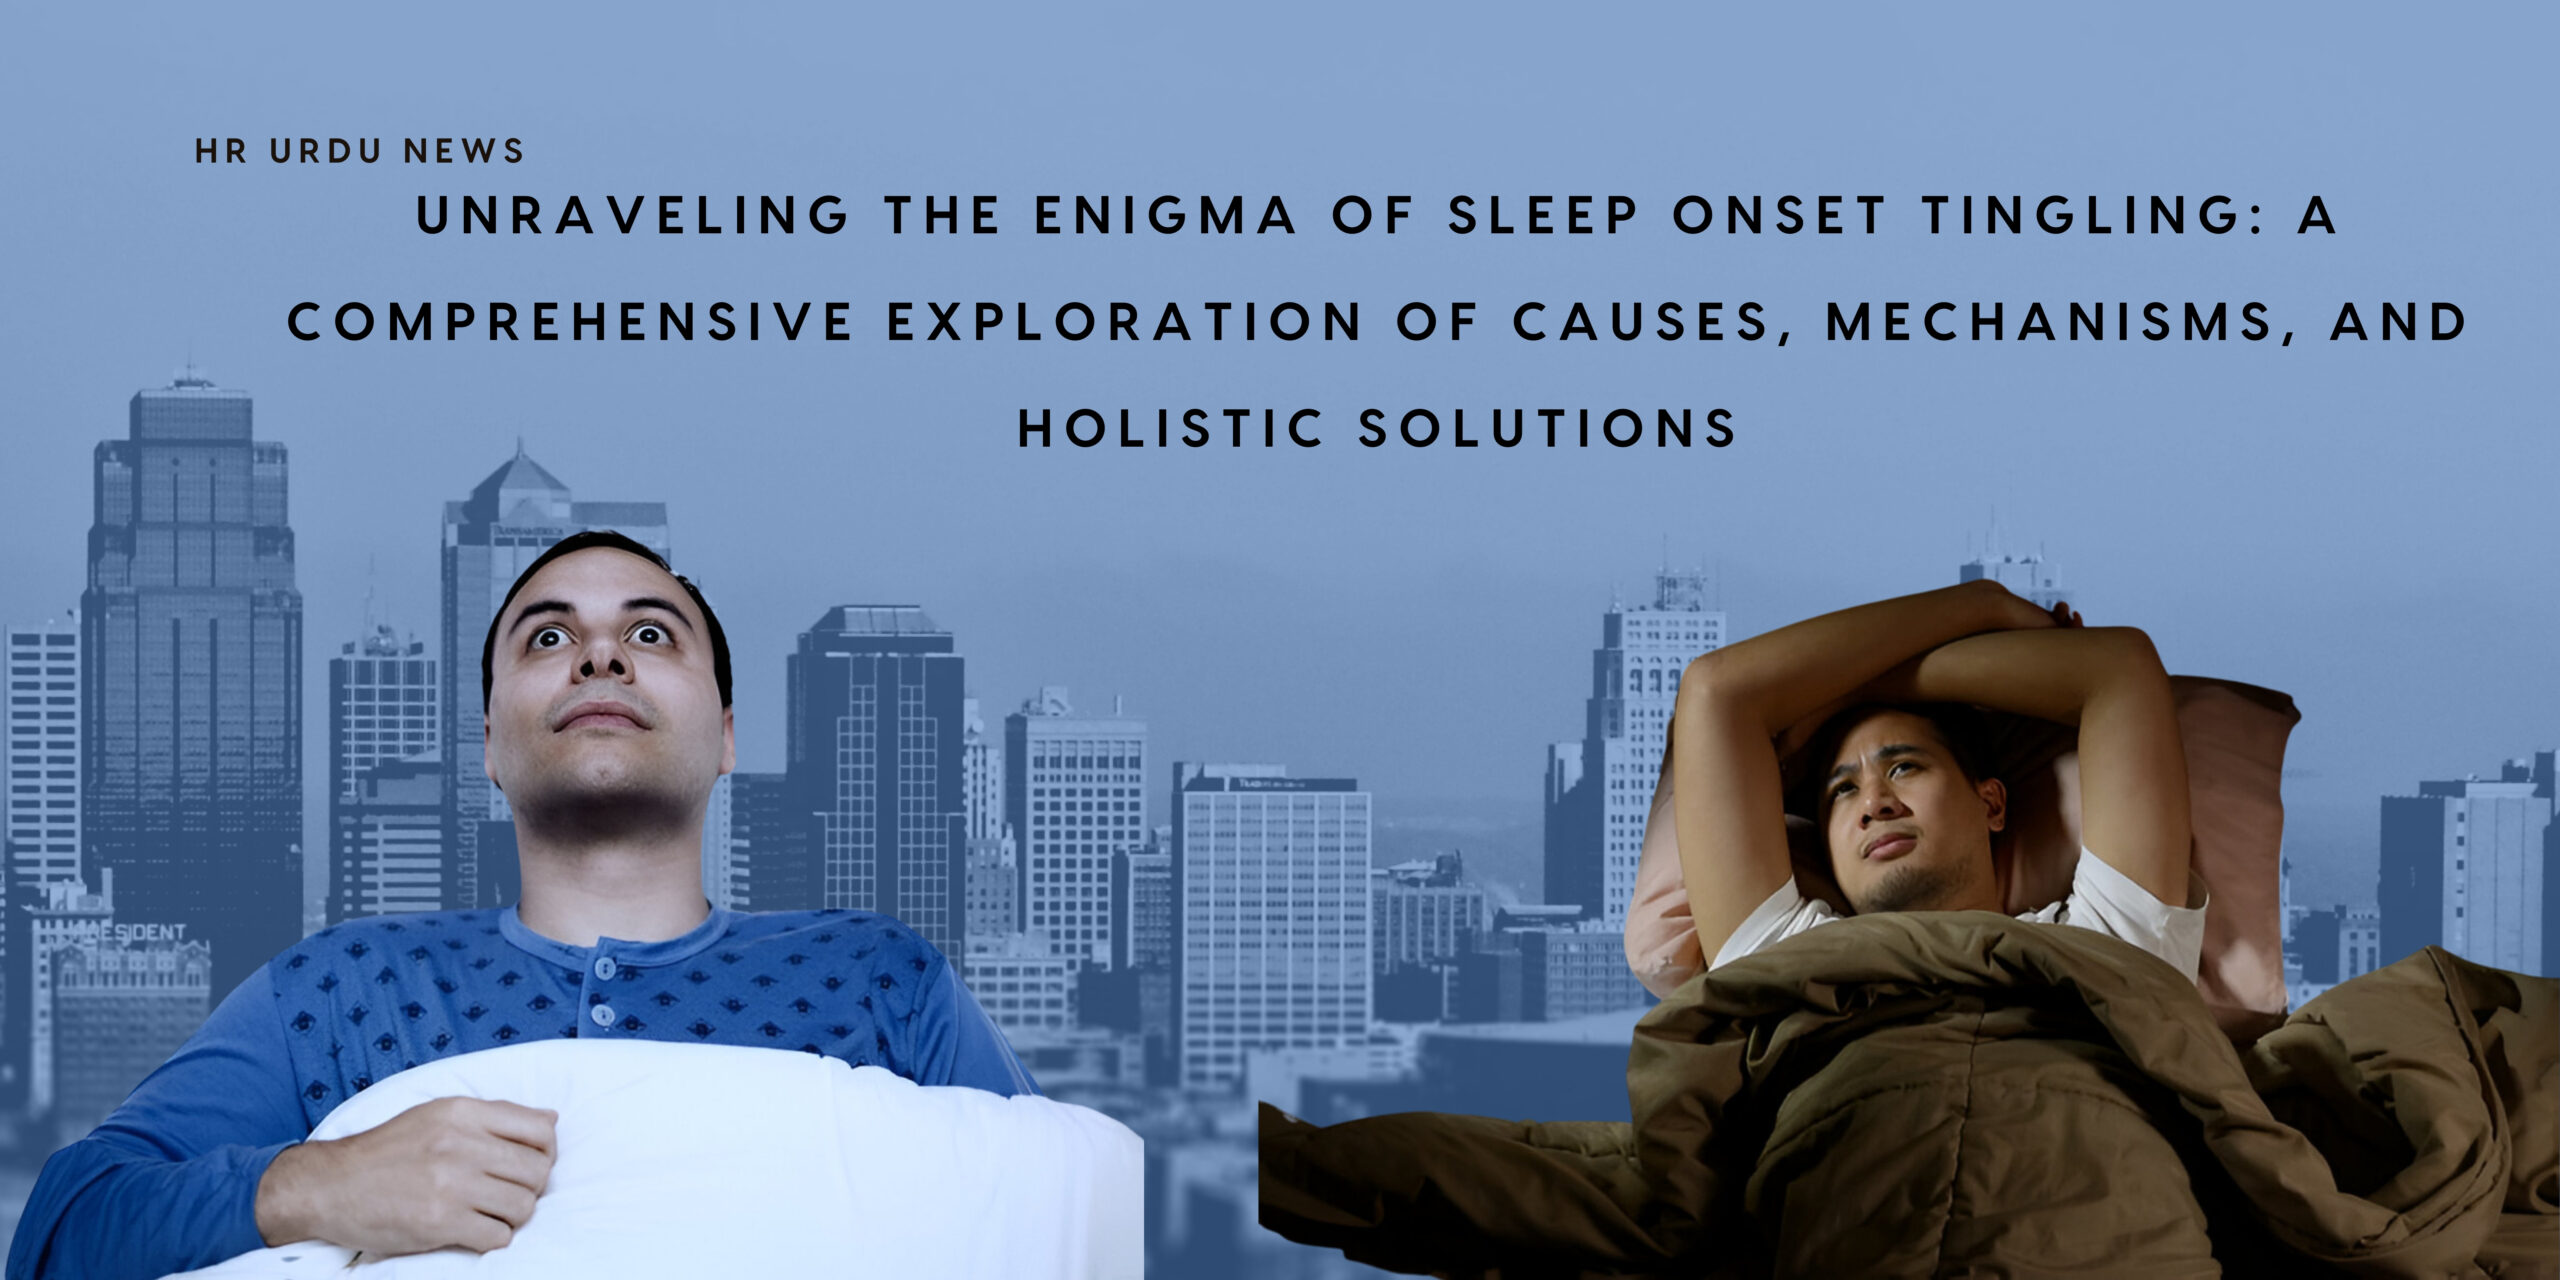 Unraveling the Enigma of Sleep Onset Tingling: A Comprehensive Exploration of Causes, Mechanisms, and Holistic Solutions